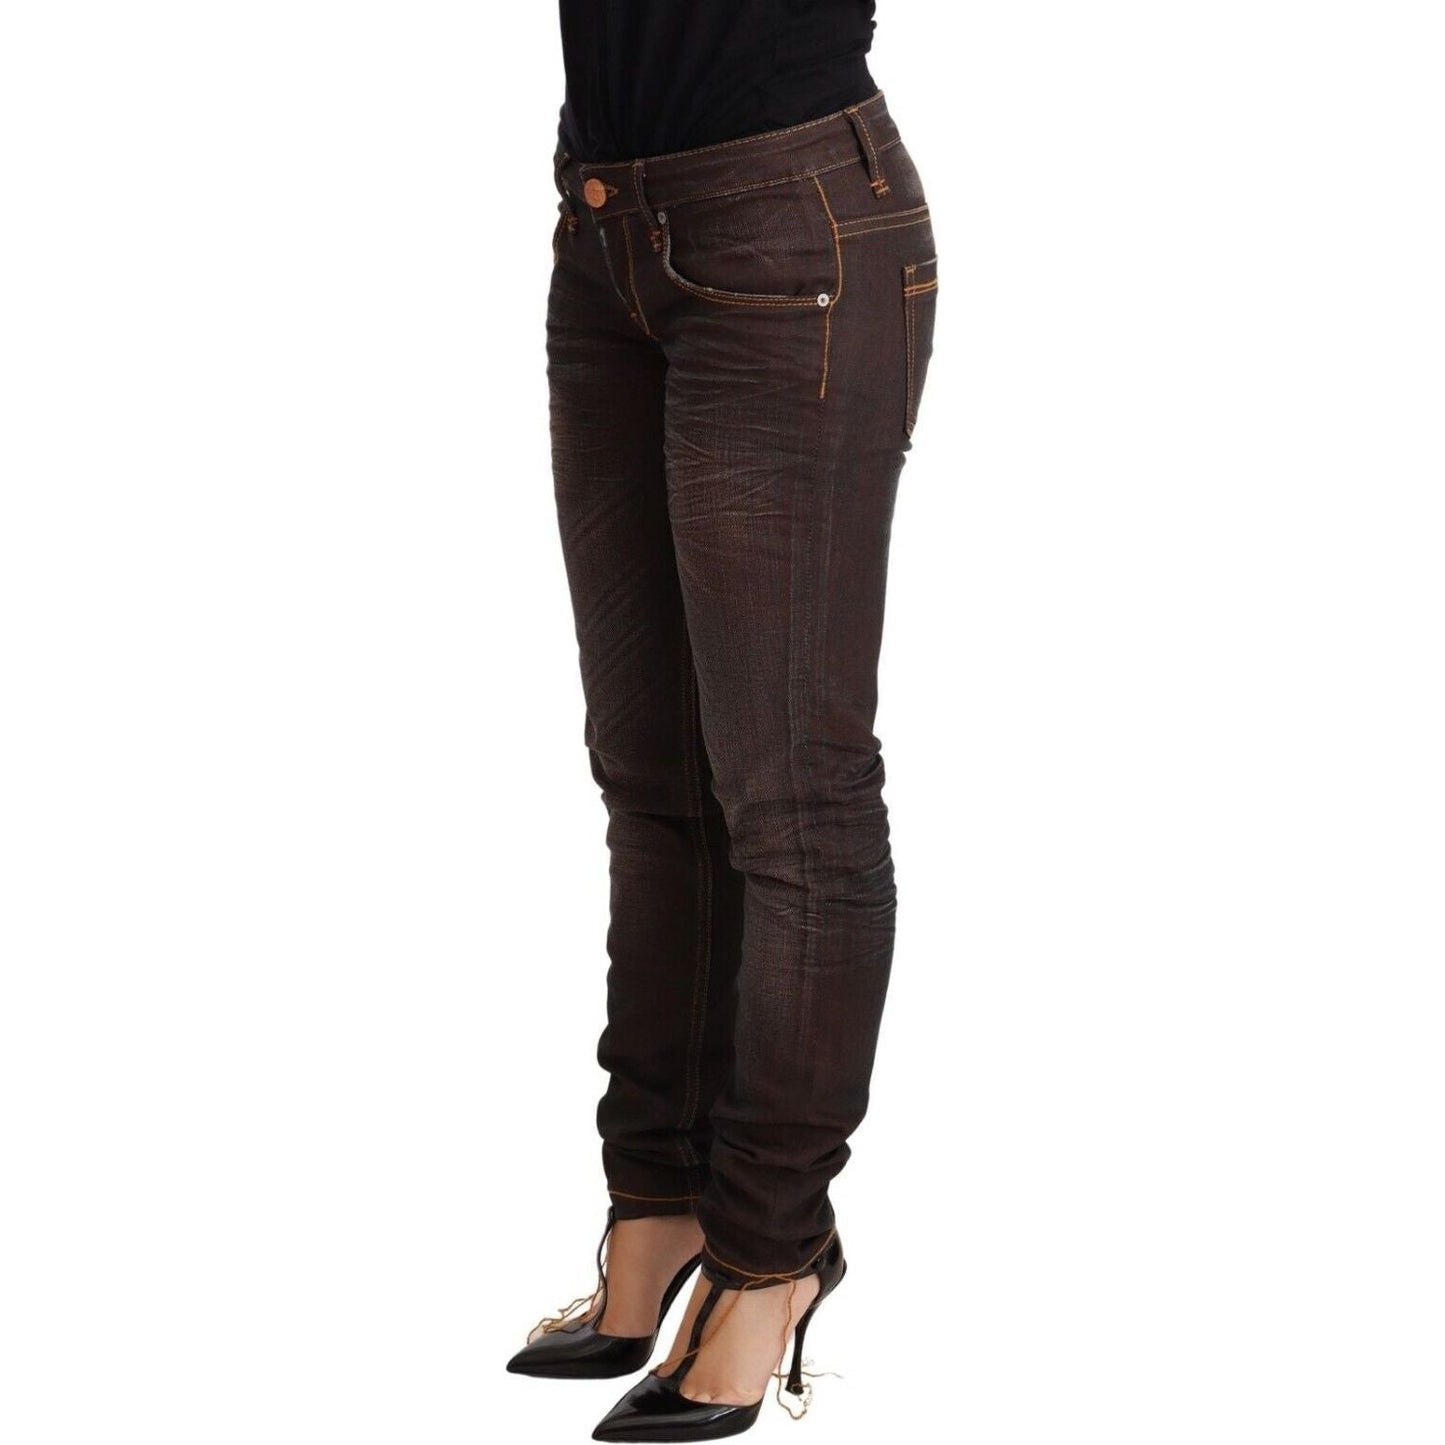 Acht Chic Low Waist Skinny Brown Jeans brown-washed-cotton-slim-fit-denim-low-waist-trouser-jeans Jeans & Pants s-l1600-151-97bb2175-bc3.jpg